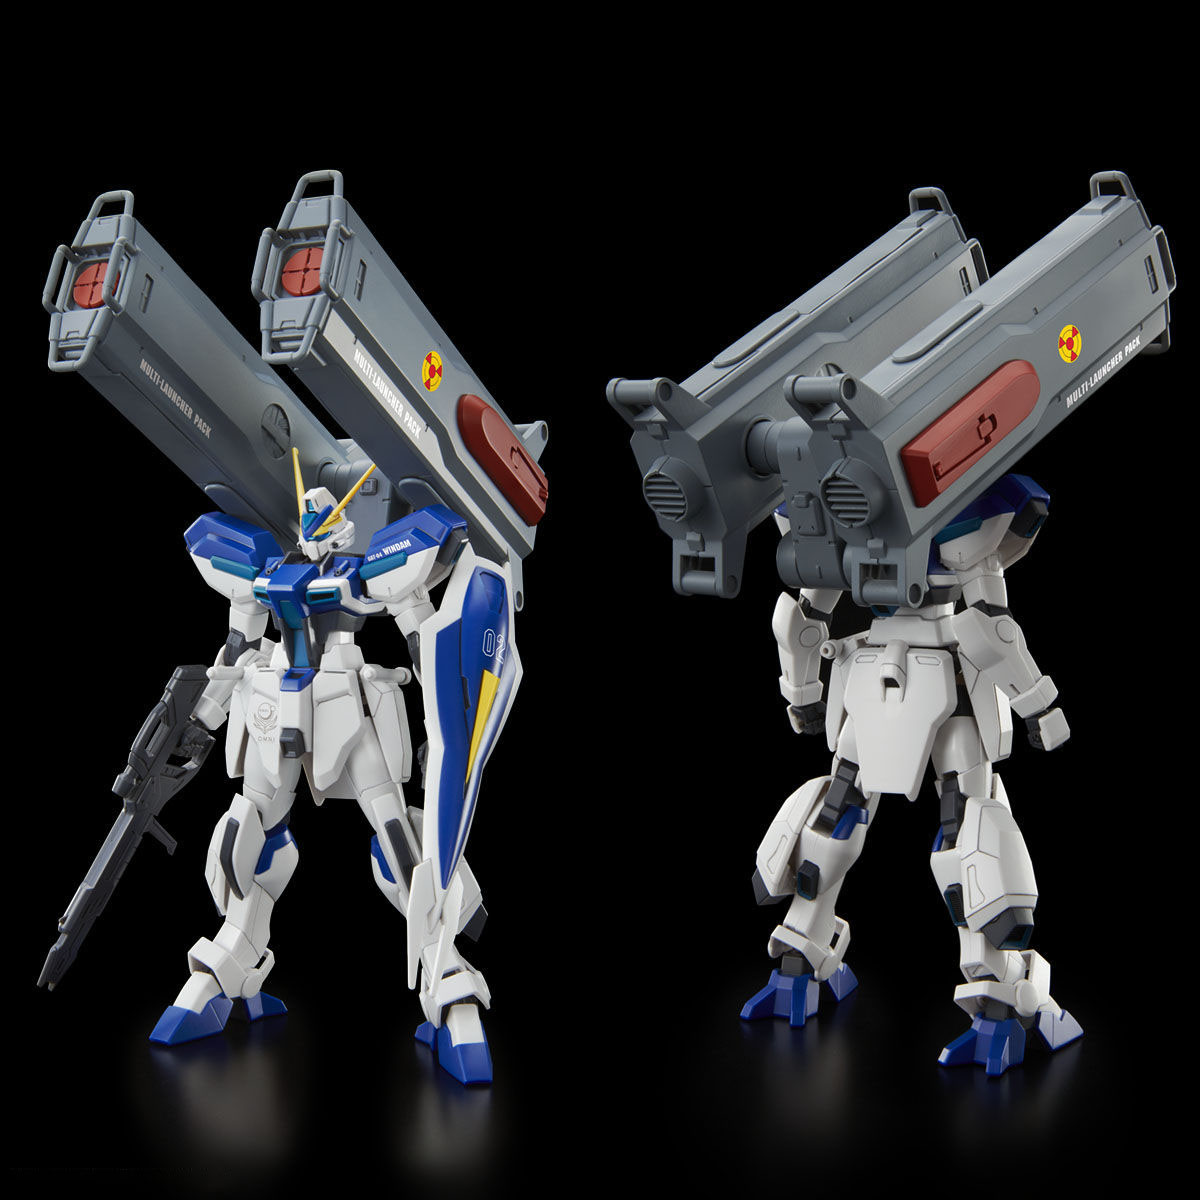 HG 1/144 EXPANSION SET for WINDAM & DAGGER L | GUNDAM | PREMIUM BANDAI USA  Online Store for Action Figures, Model Kits, Toys and more